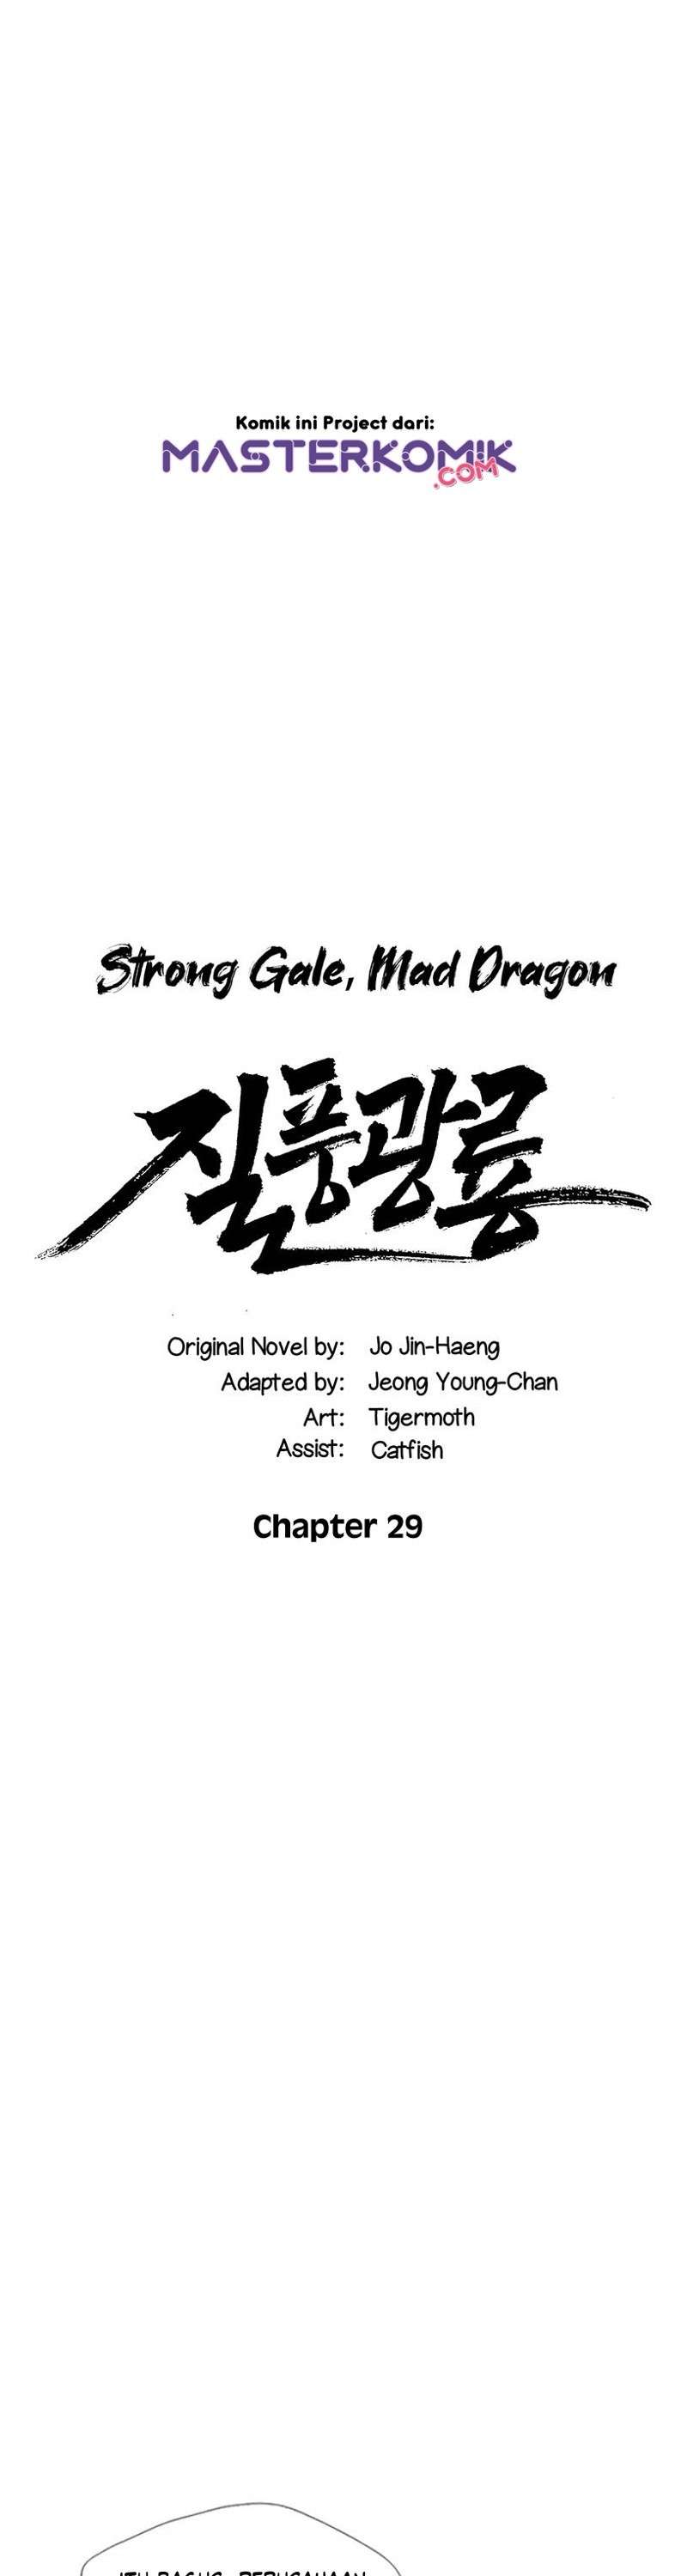 Strong Gale, Mad Dragon Chapter 29